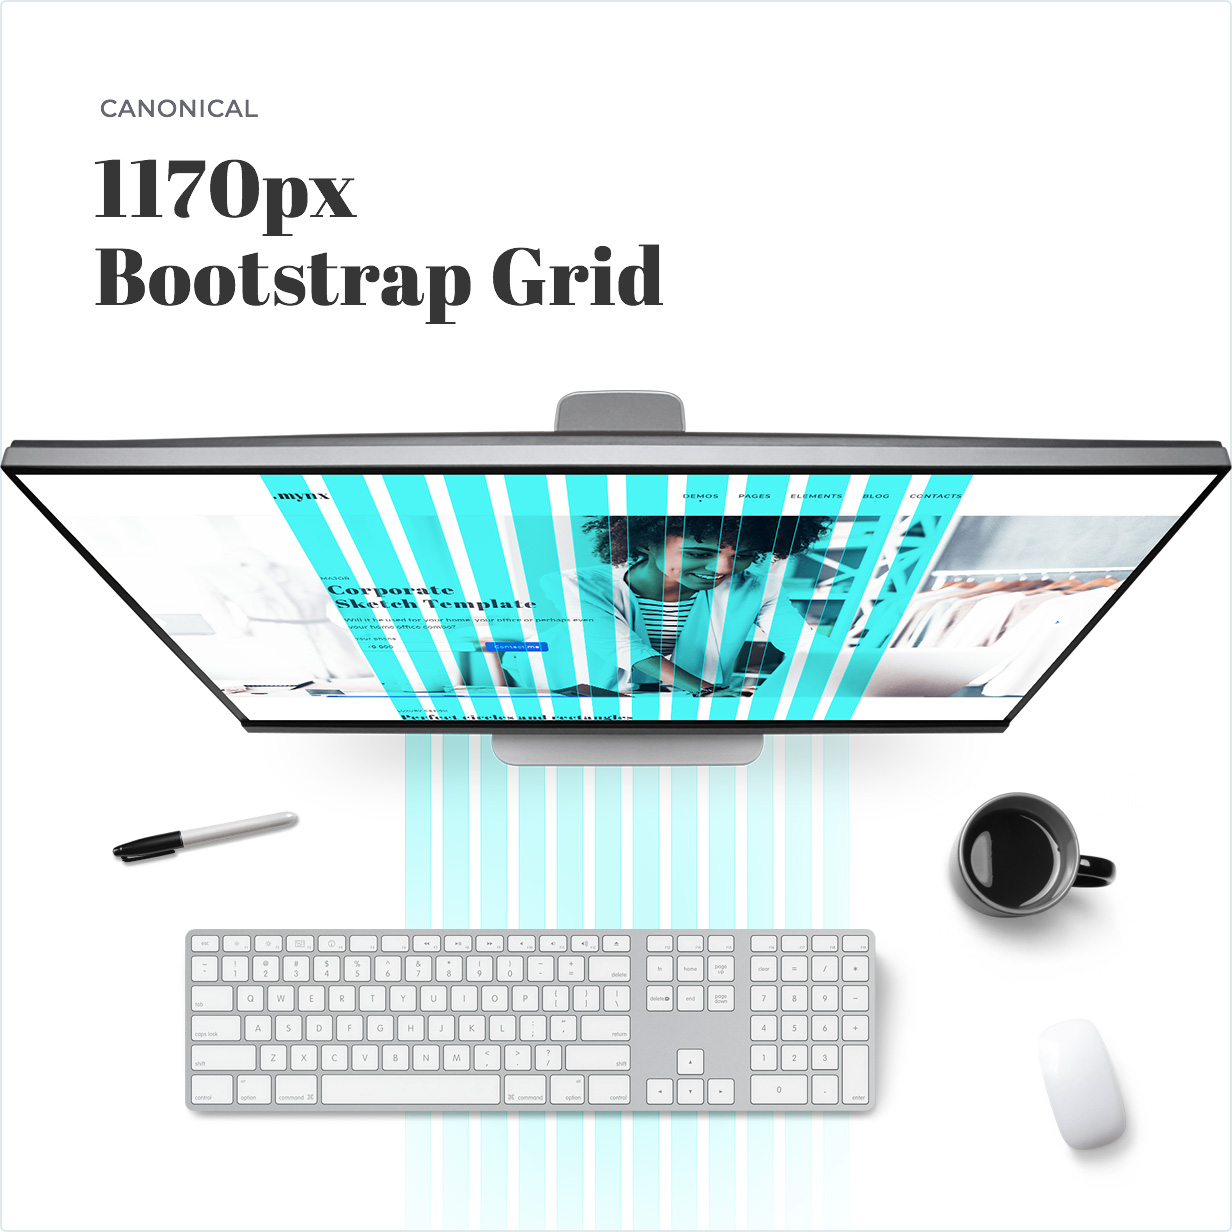 Grille Bootstrap Canonical 1170px